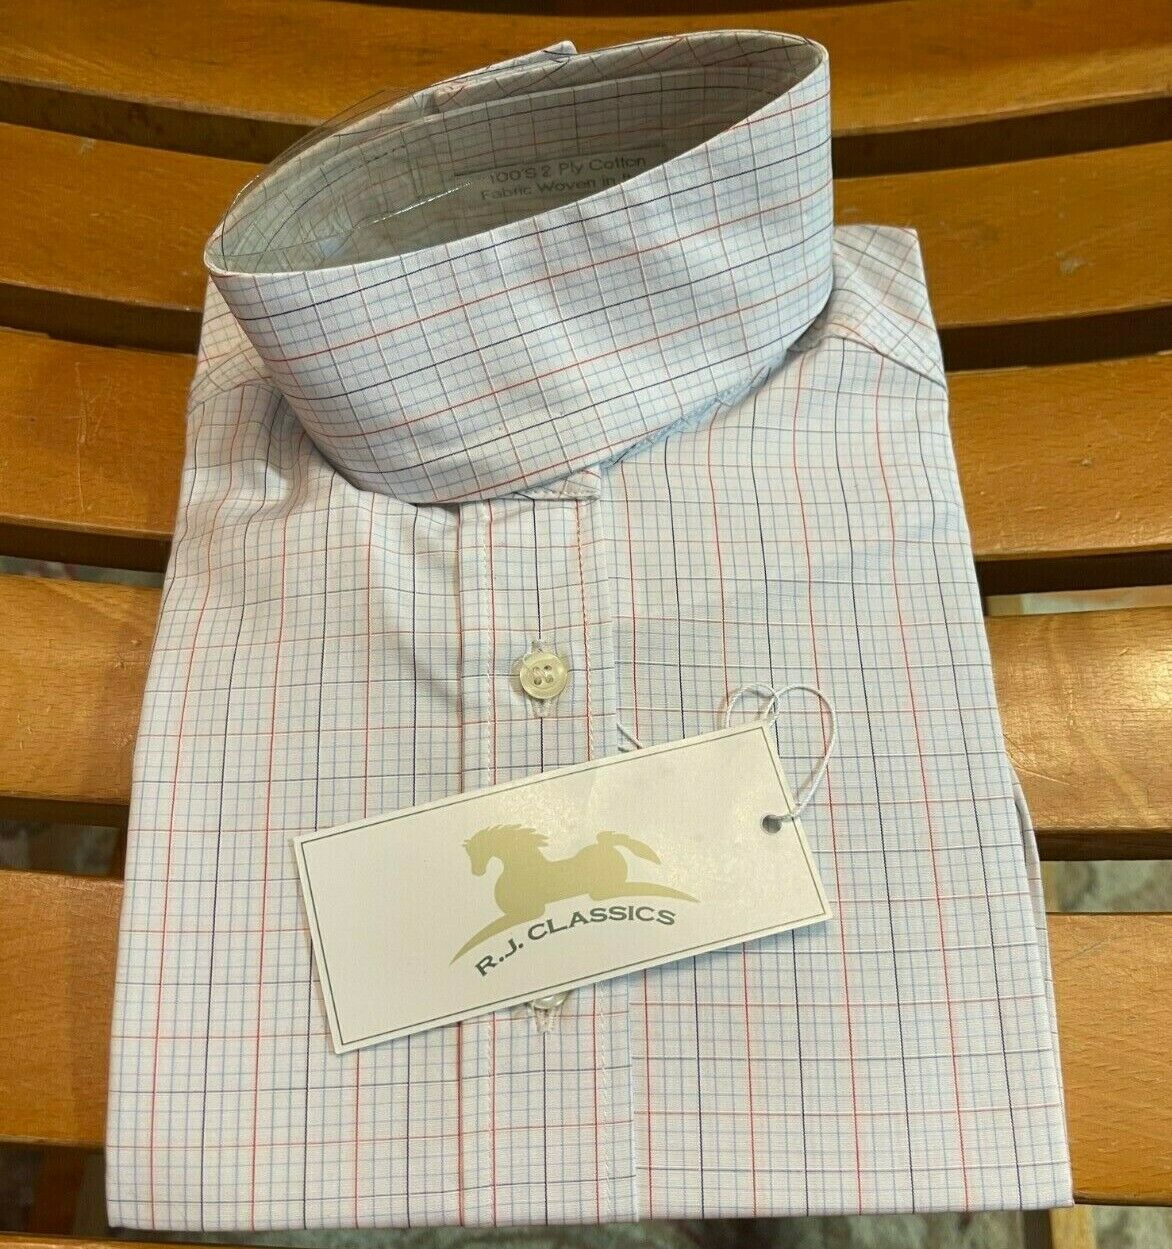 Women’s R J Classic Sterling Collection Show Shirt - Size 12- horseback